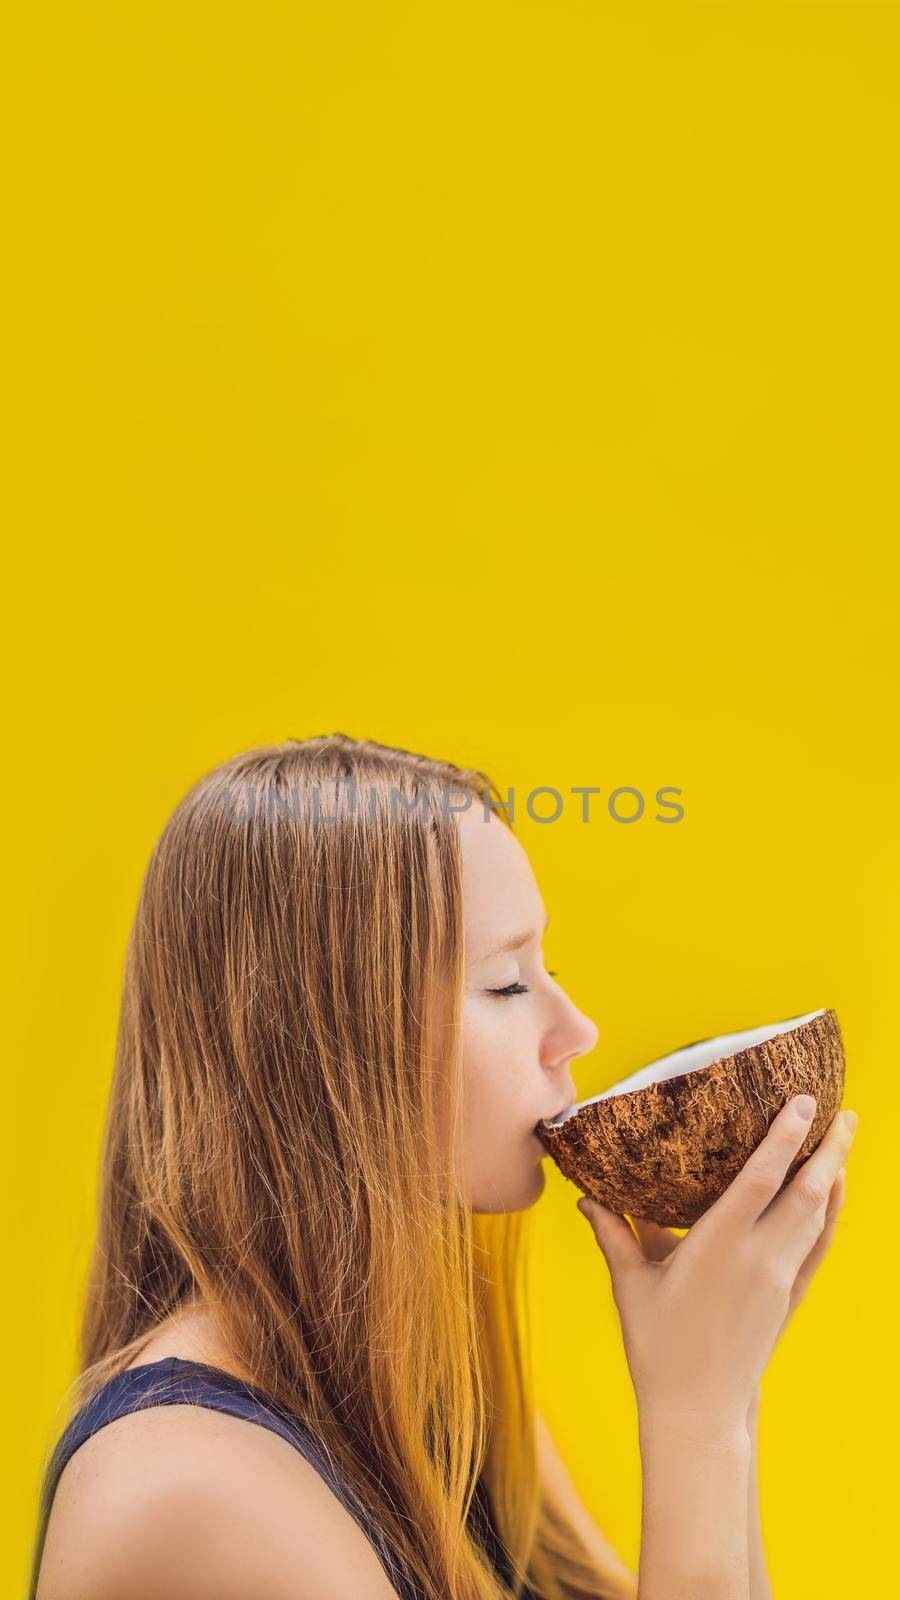 Young woman drinking coconut milk on Chafrom coconut on a yellow background VERTICAL FORMAT for Instagram mobile story or stories size. Mobile wallpaper by galitskaya